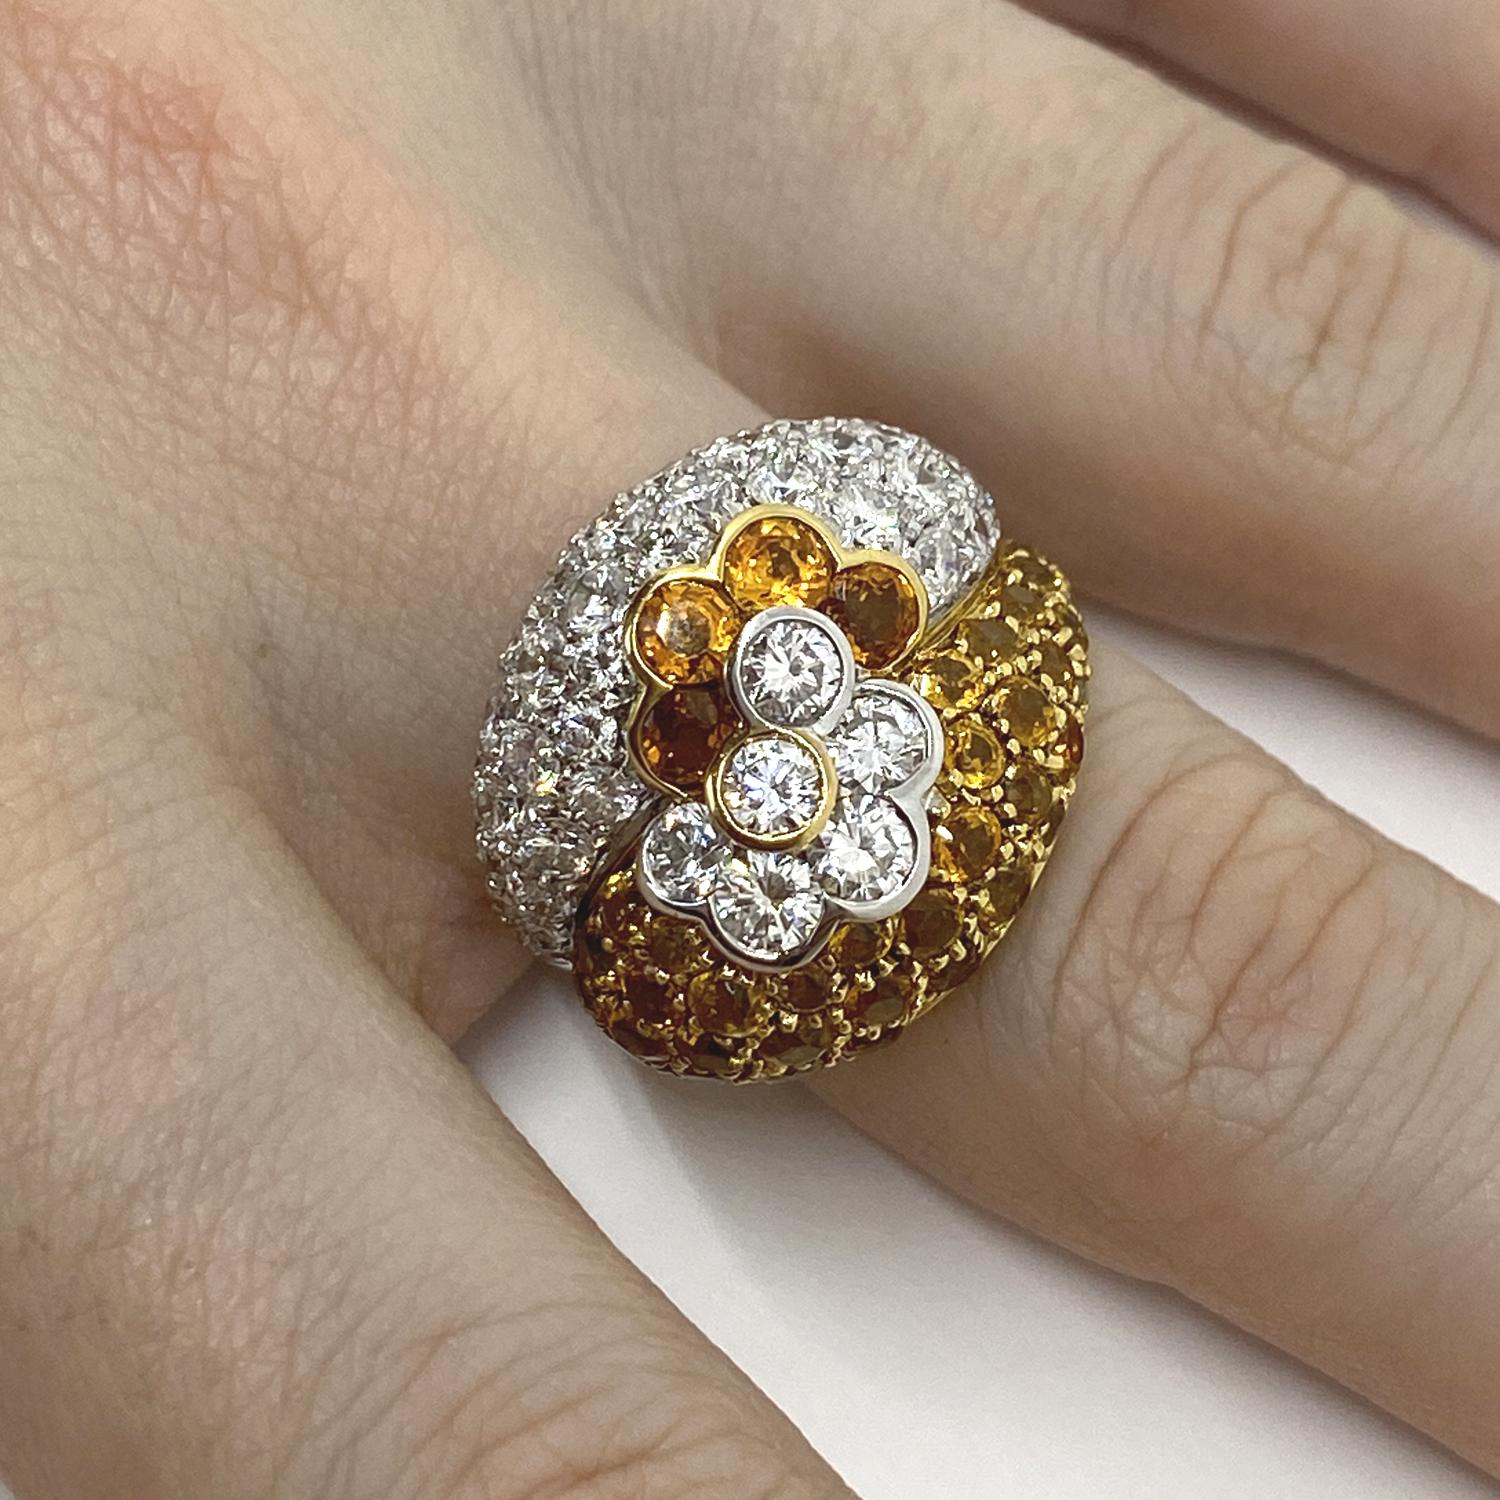 Band ring made of 18kt white and yellow gold with white brilliant-cut natural diamonds for ct.0.79 and yellow brilliant-cut natural sapphires for ct.4.10

Welcome to our jewelry collection, where every piece tells a story of timeless elegance and